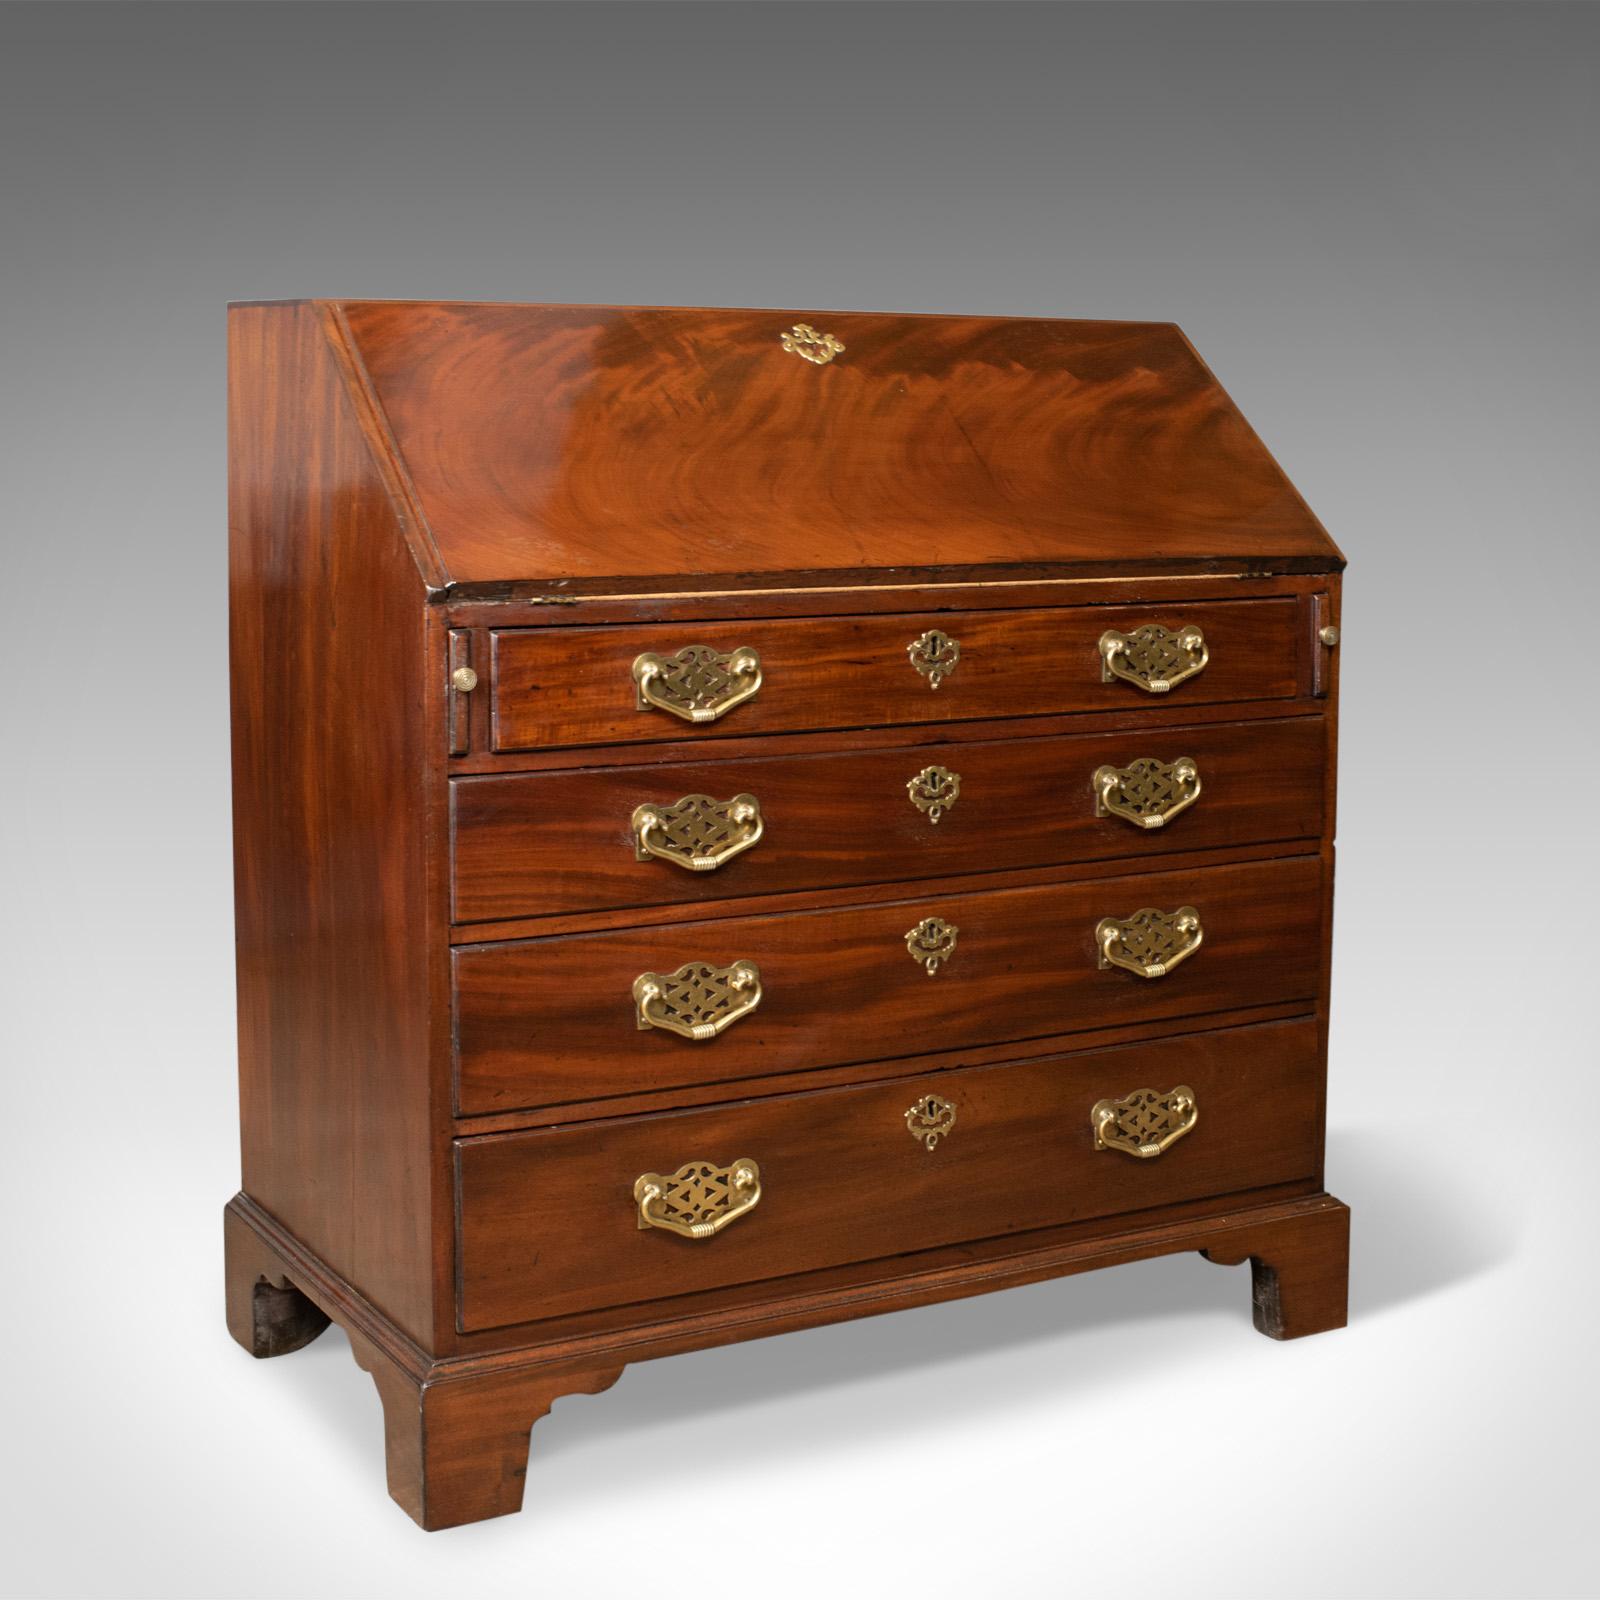 This is an antique bureau in mahogany. An English, Georgian bureau featuring generous desk space and storage compartments, dating to circa 1800.

Quality craftsmanship in polished mahogany
Good consistent colour and grain interest